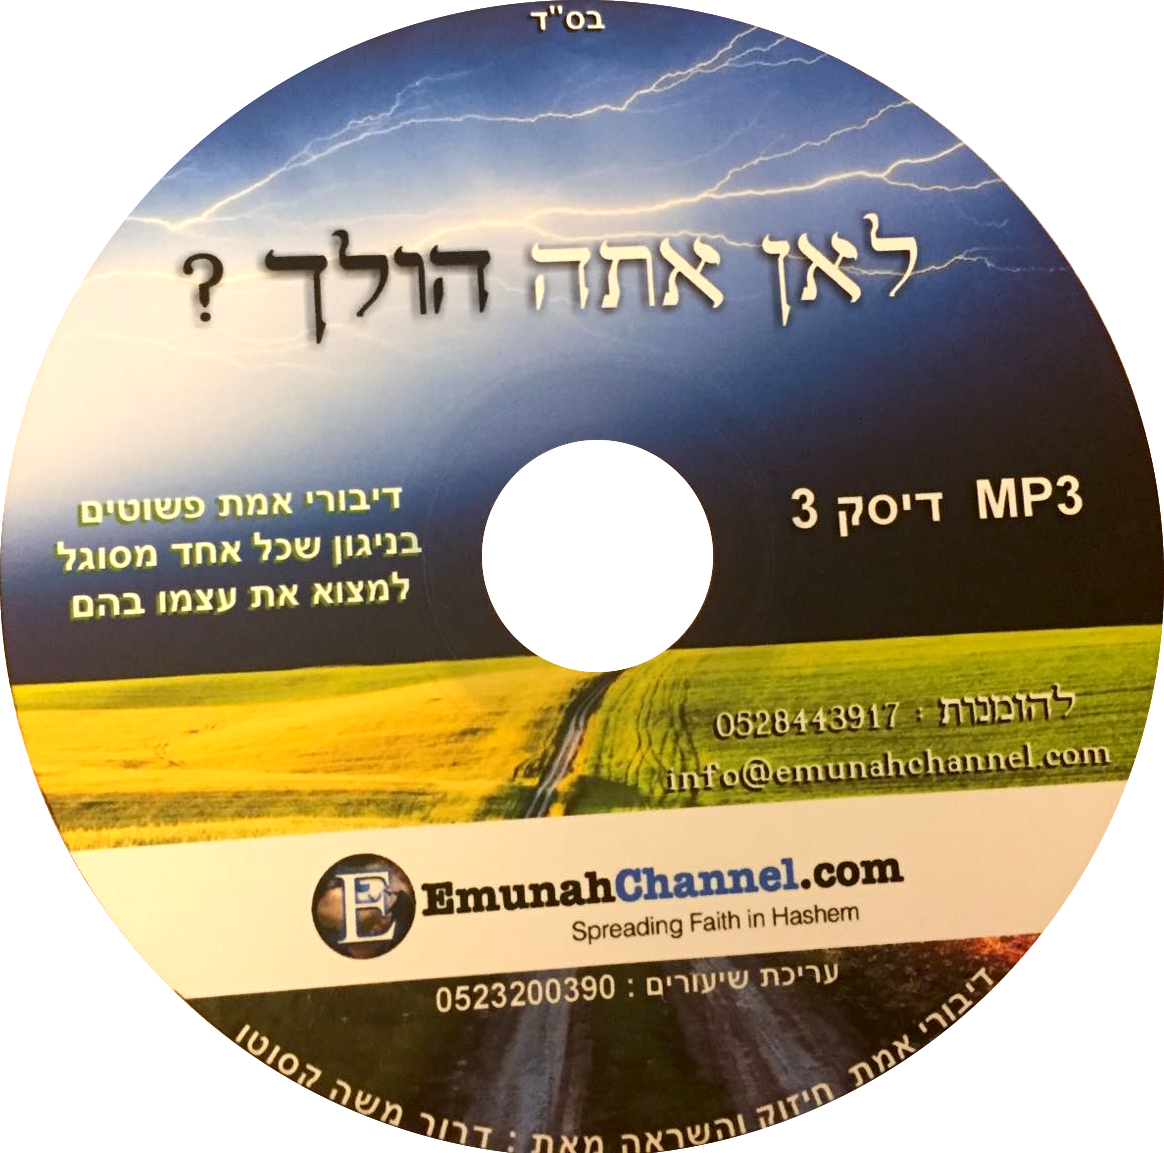 Where Are You Going? (Hebrew CD)